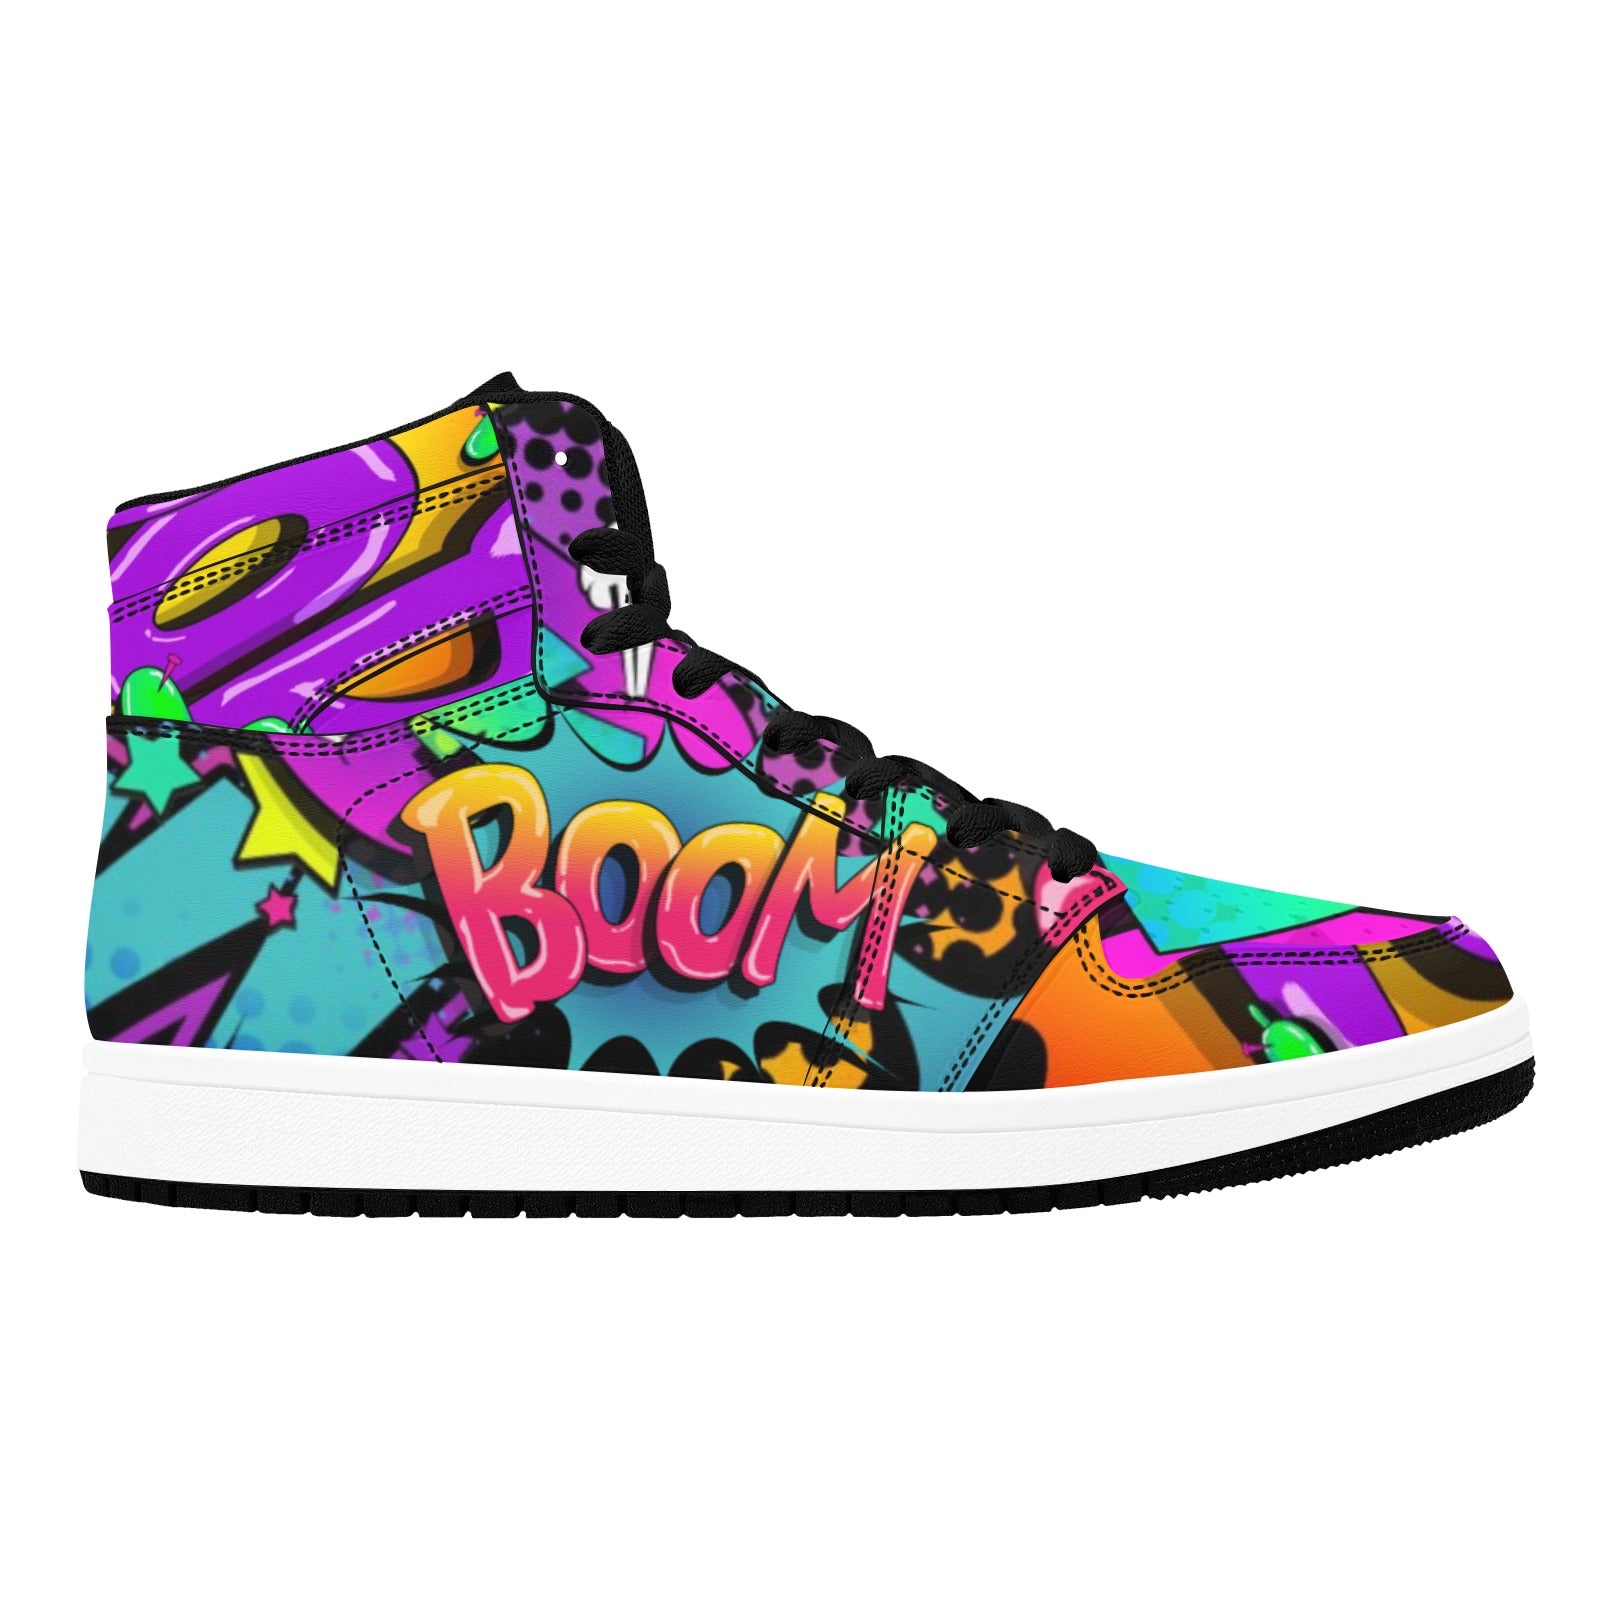 Bright and fun Premium High tops for balloon twisters and entertainers